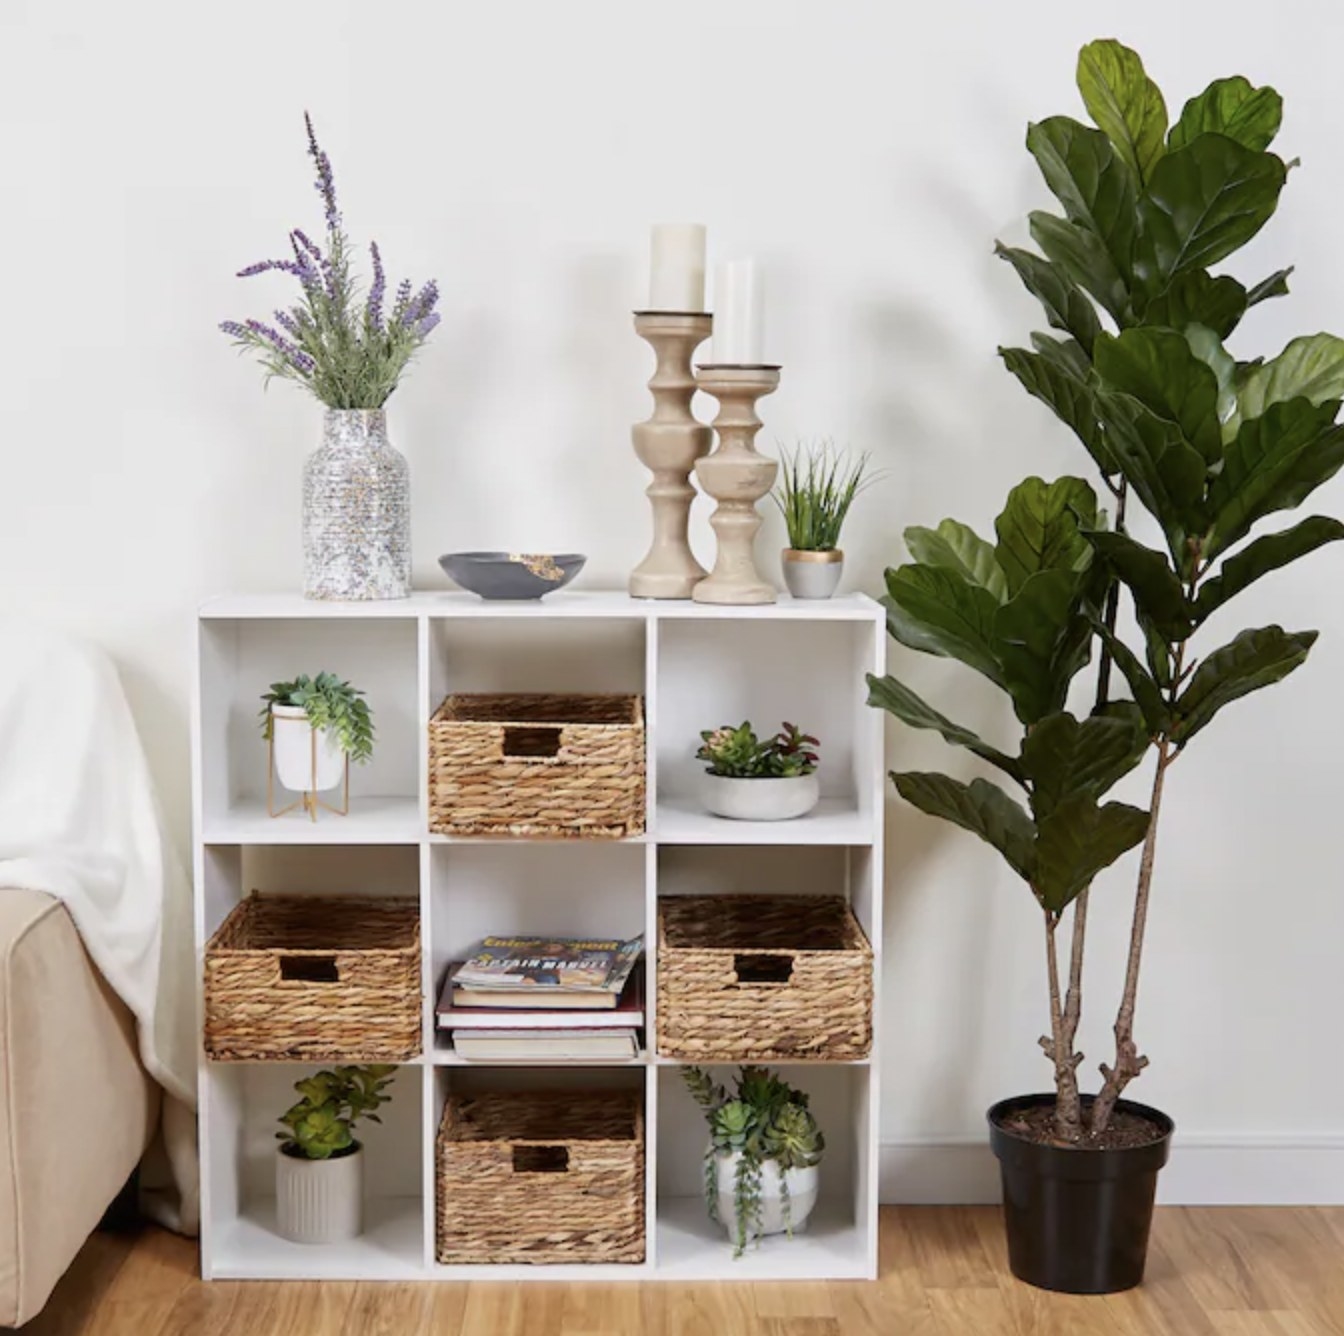 White storage cube with nine units filled with plants and wooden baskets